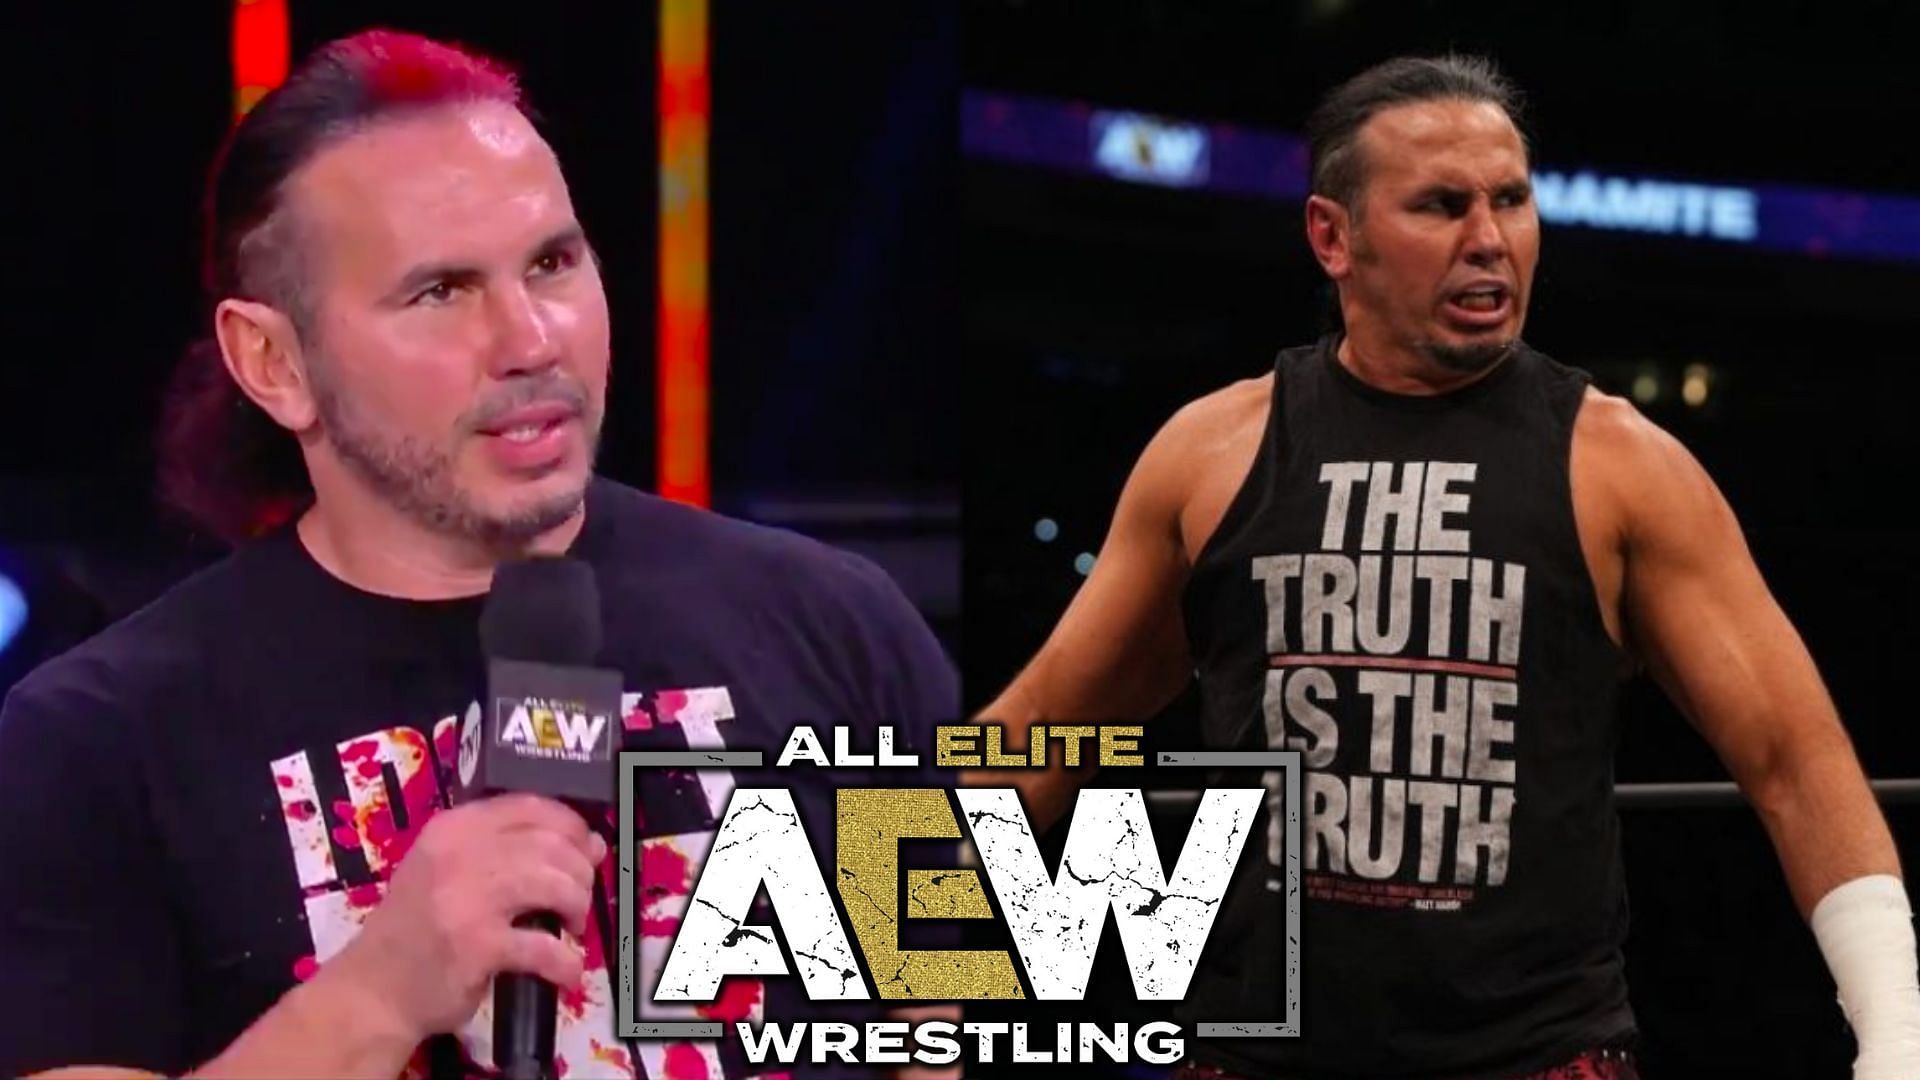 Matt Hardy has over 20 years of pro wrestling experience.